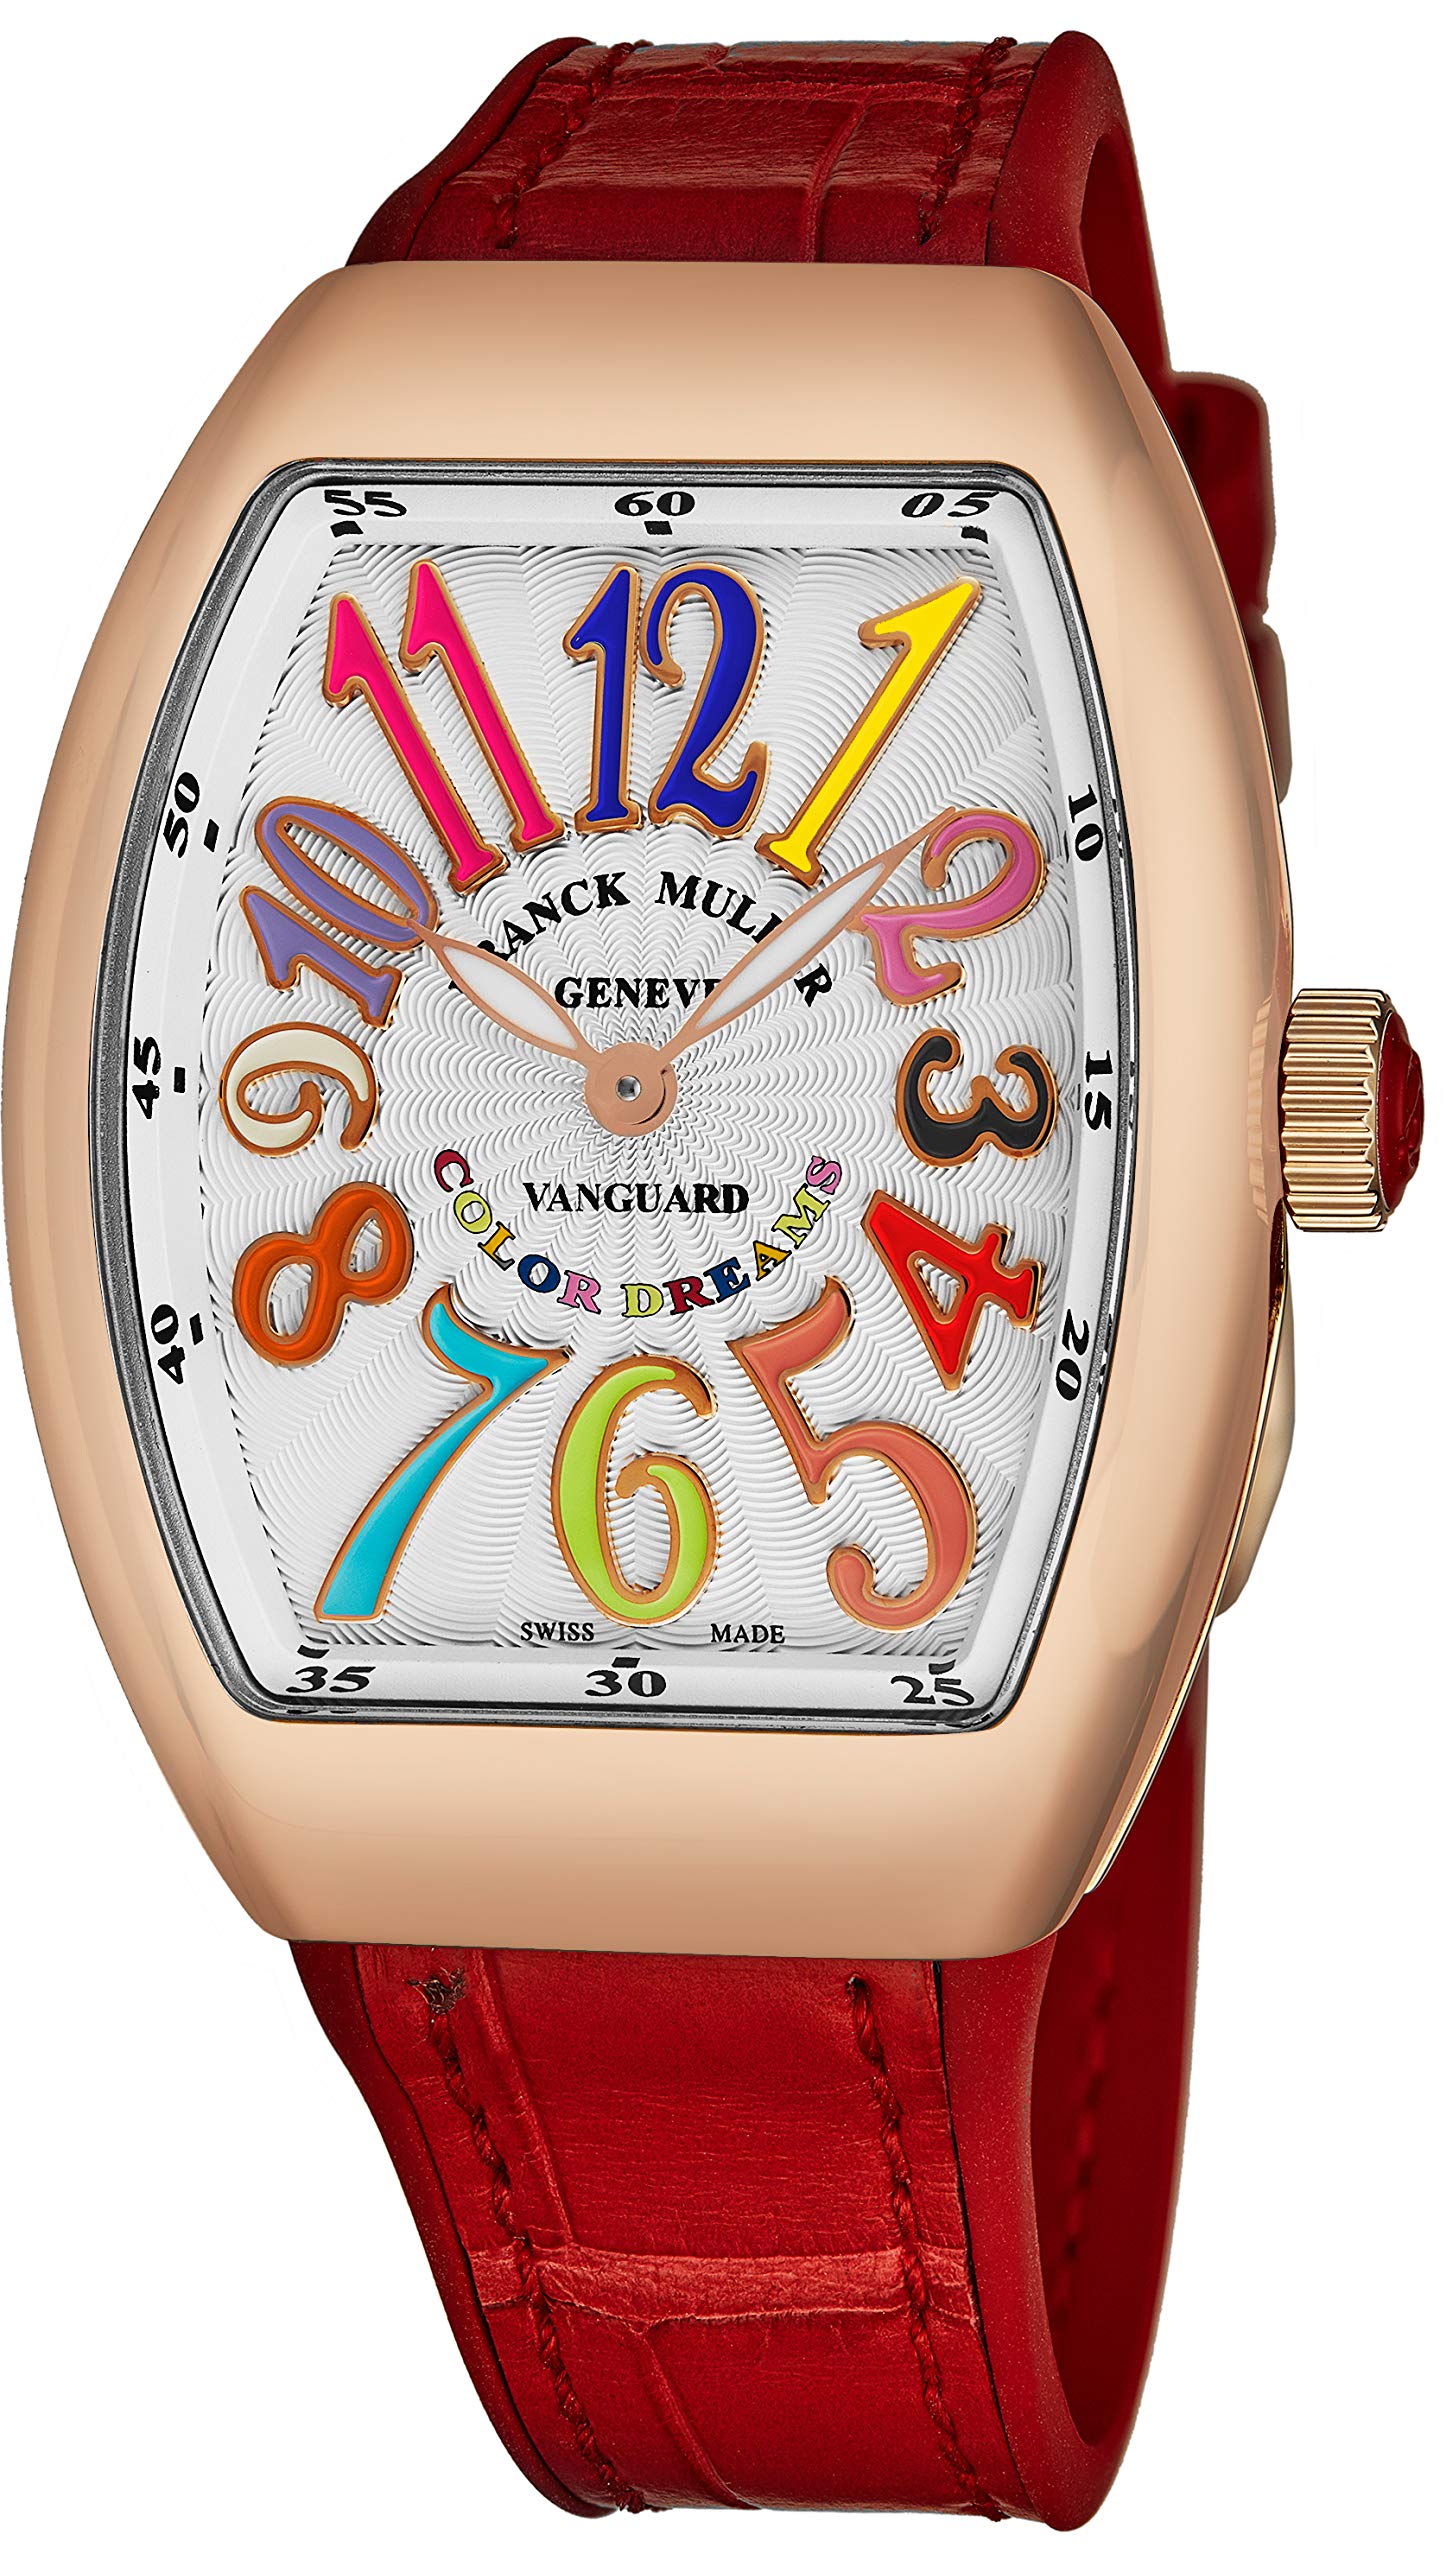 Franck Muller Vanguard Color Dreams Womens 18K Rose Gold Swiss Quartz Watch Tonneau Silver Face with Luminous Hands and Sapphire Crystal - Red Leather/Rubber Strap Ladies Watch V 32 SC at FO COL DRM